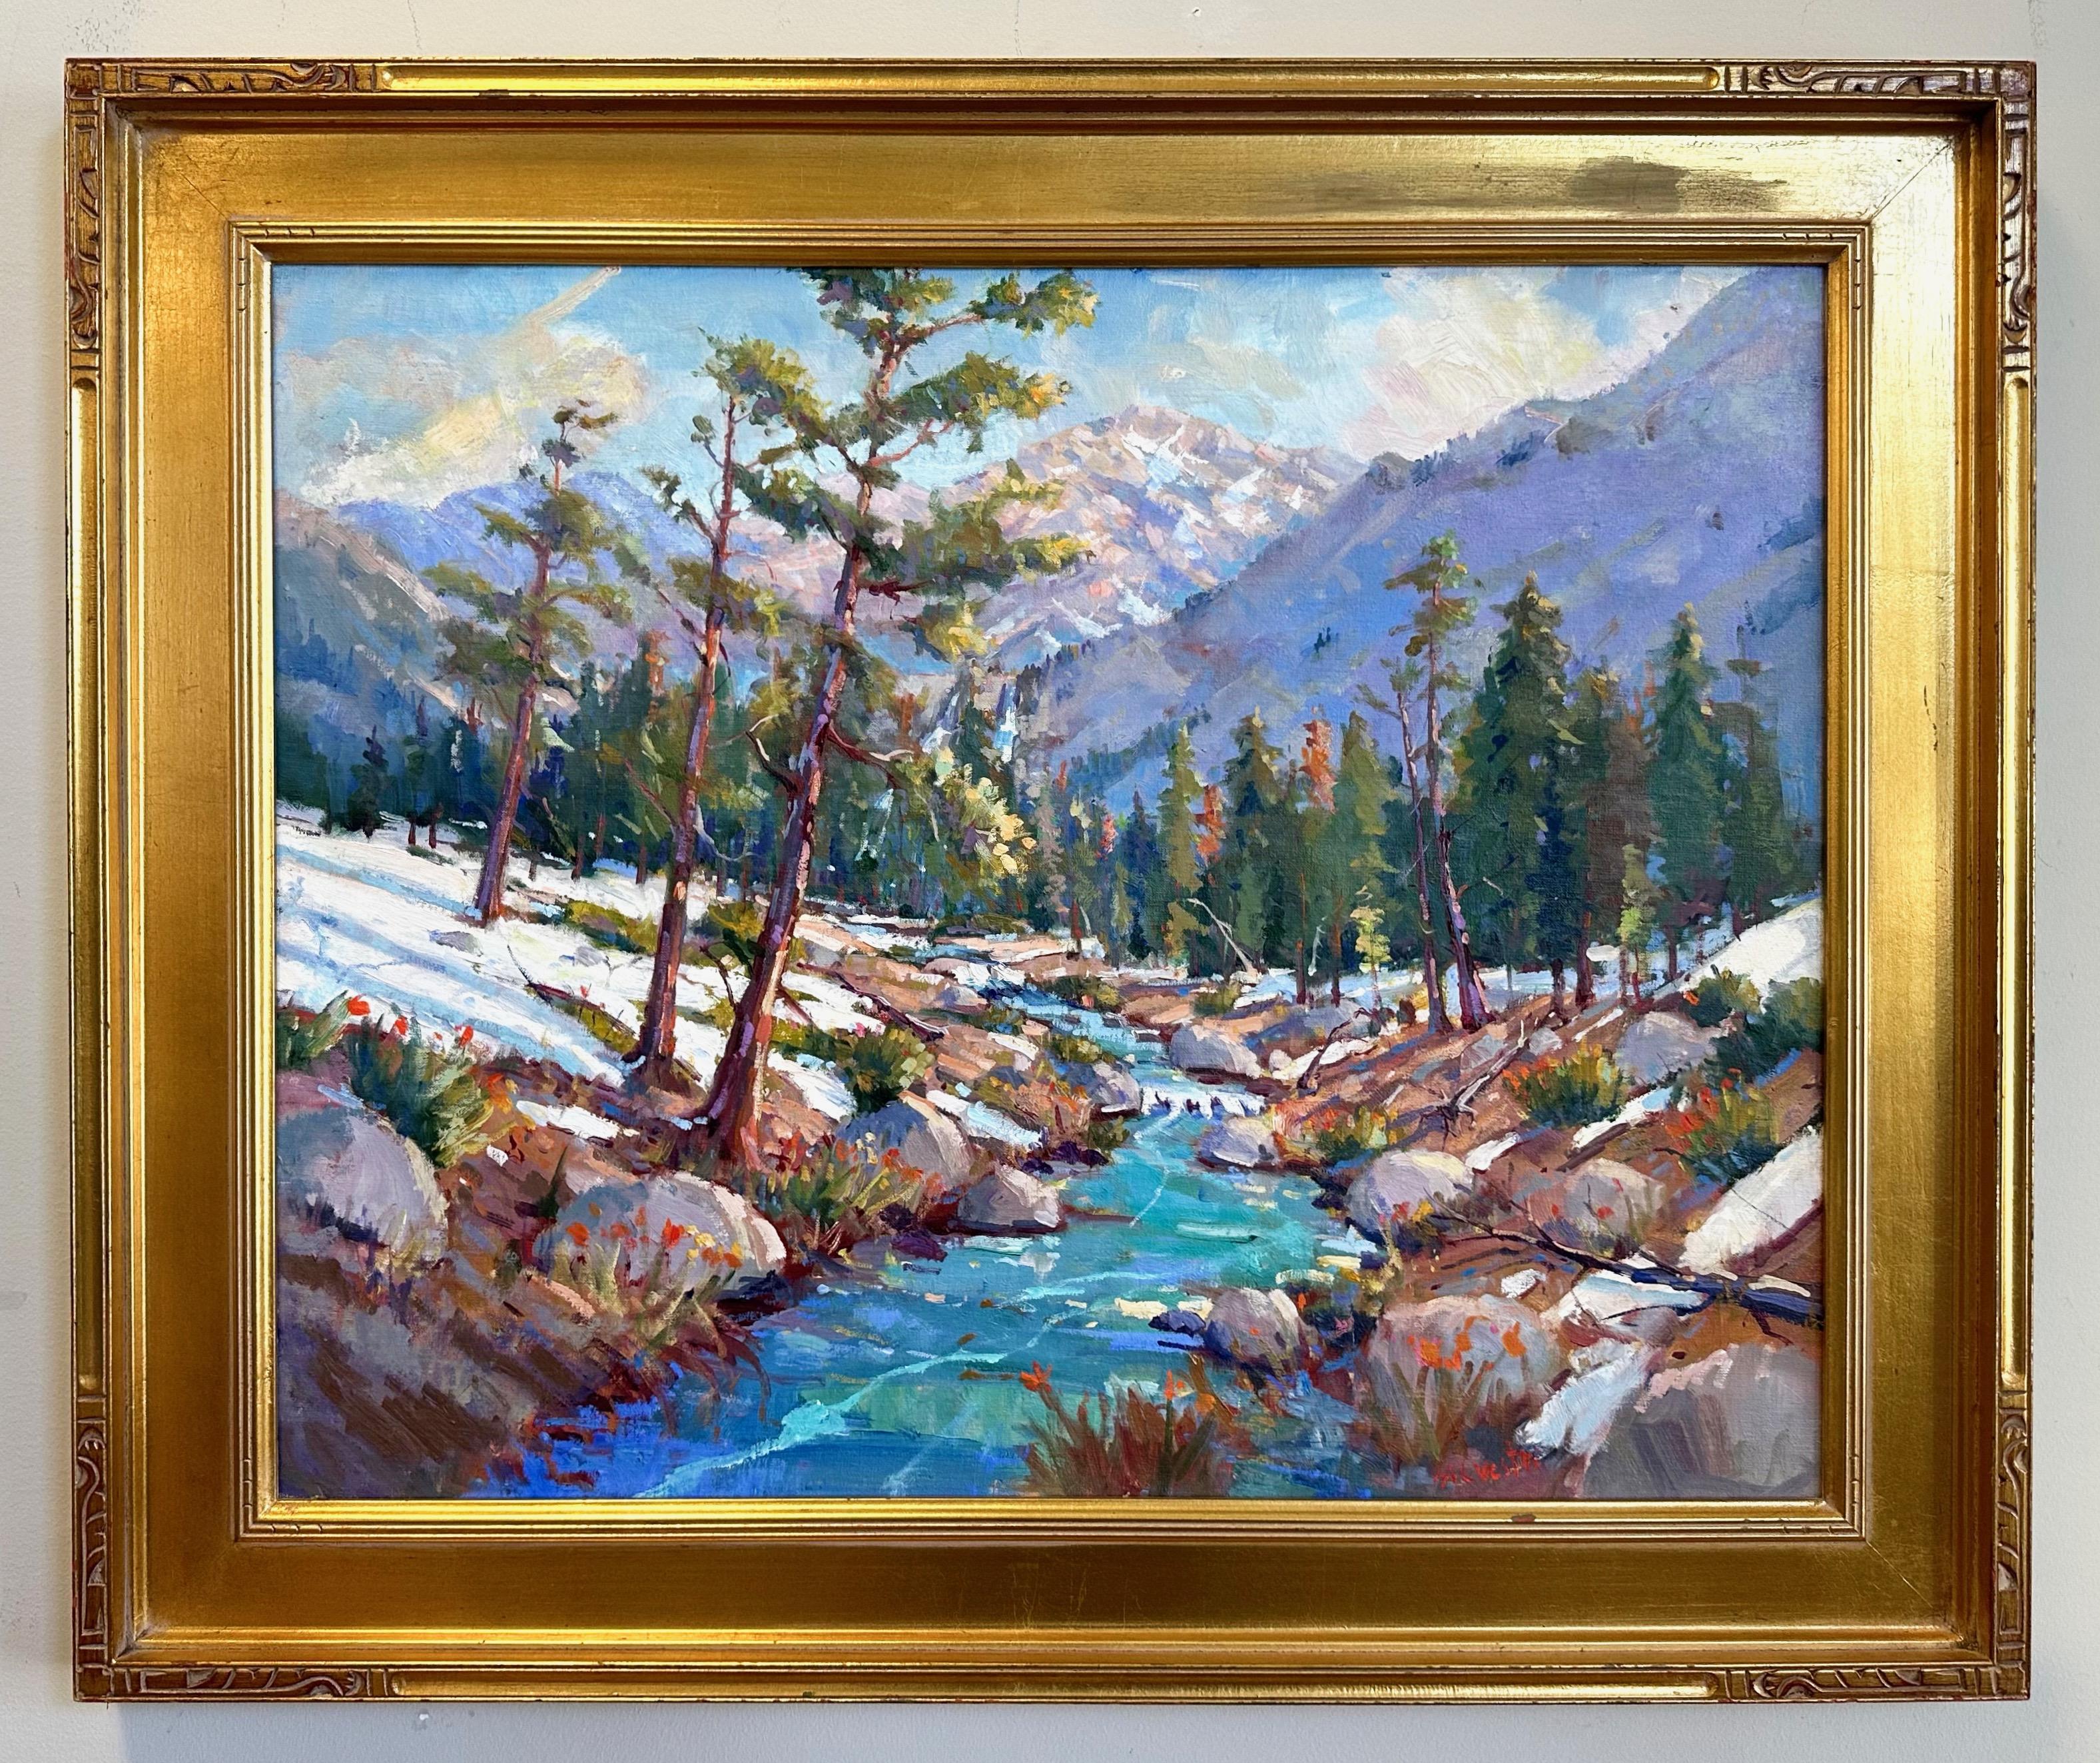 A large, luminous, and captivating 2004 en plein air impressionist oil painting on masonite board in giltwood frame titled “Spring Thaw – Lake Tahoe” by award-winning Northern California landscape artist Silvio Silvestri.

Strikingly beautiful and